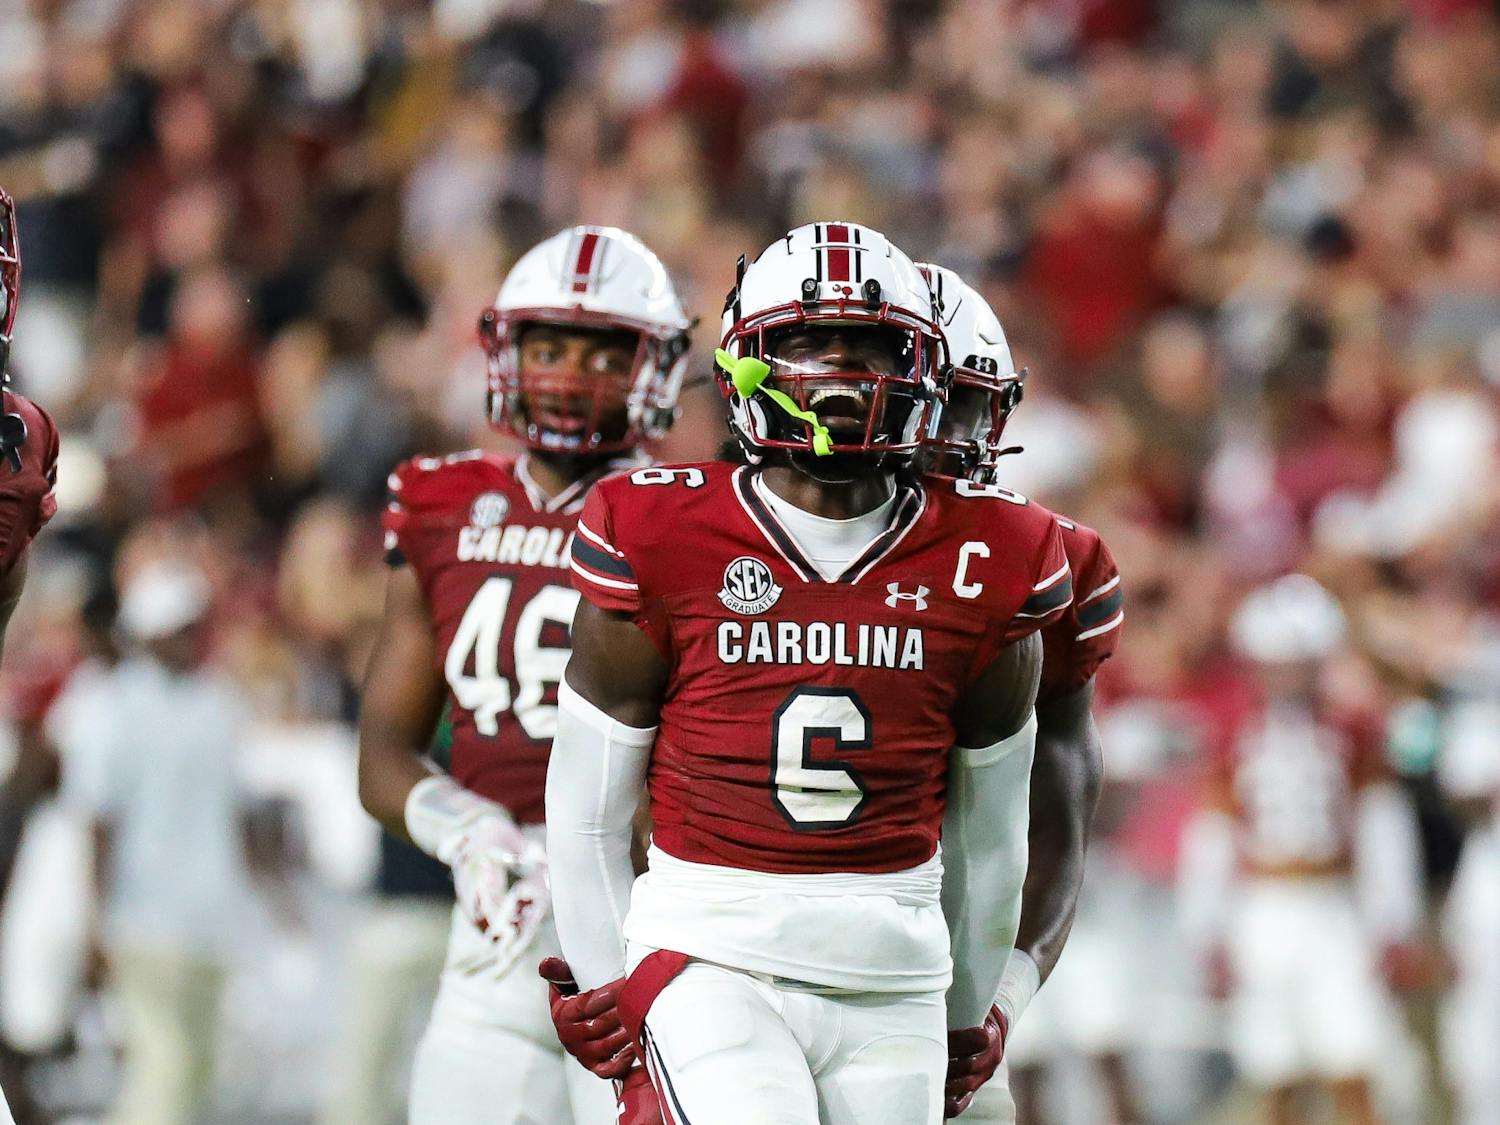 &nbsp;The South Carolina Gamecocks took down the Furman Paladins 47-21 in its first home game of the season on Sept. 9, 2023. The Gamecocks worked in several freshman and evened up its record to 1-1 in 2023.